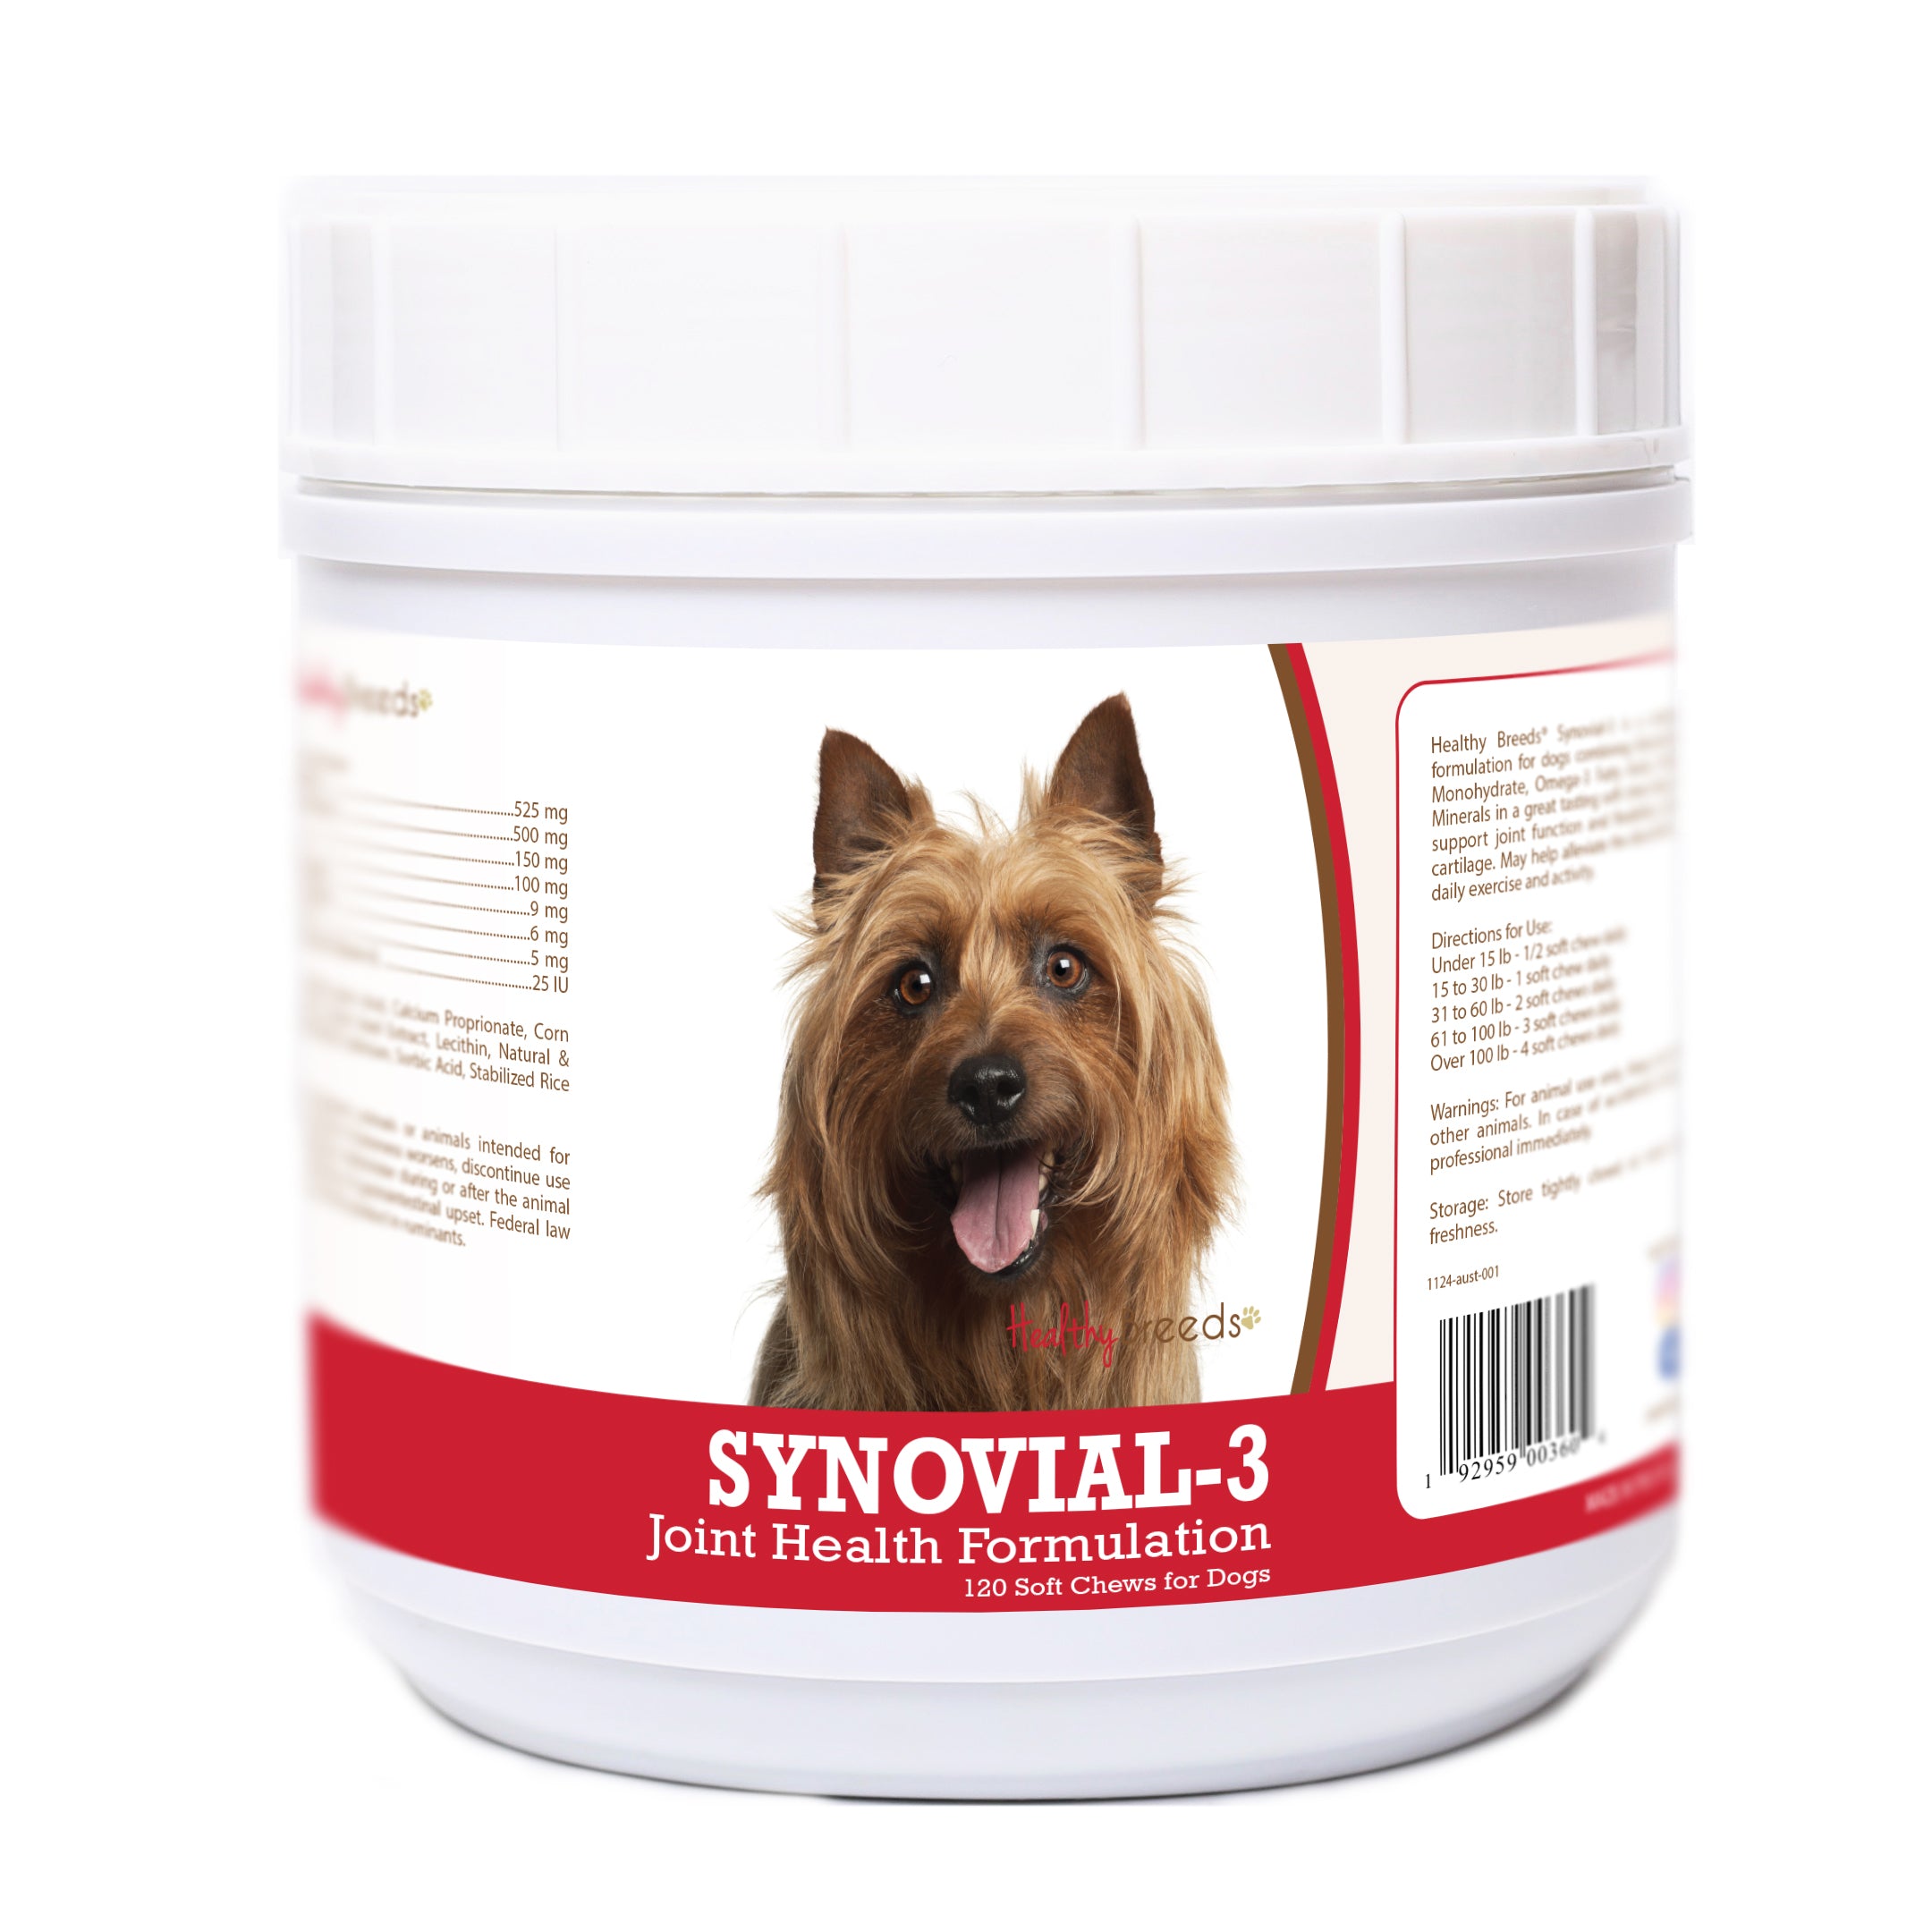 Australian Terrier Synovial-3 Joint Health Formulation Soft Chews 120 Count